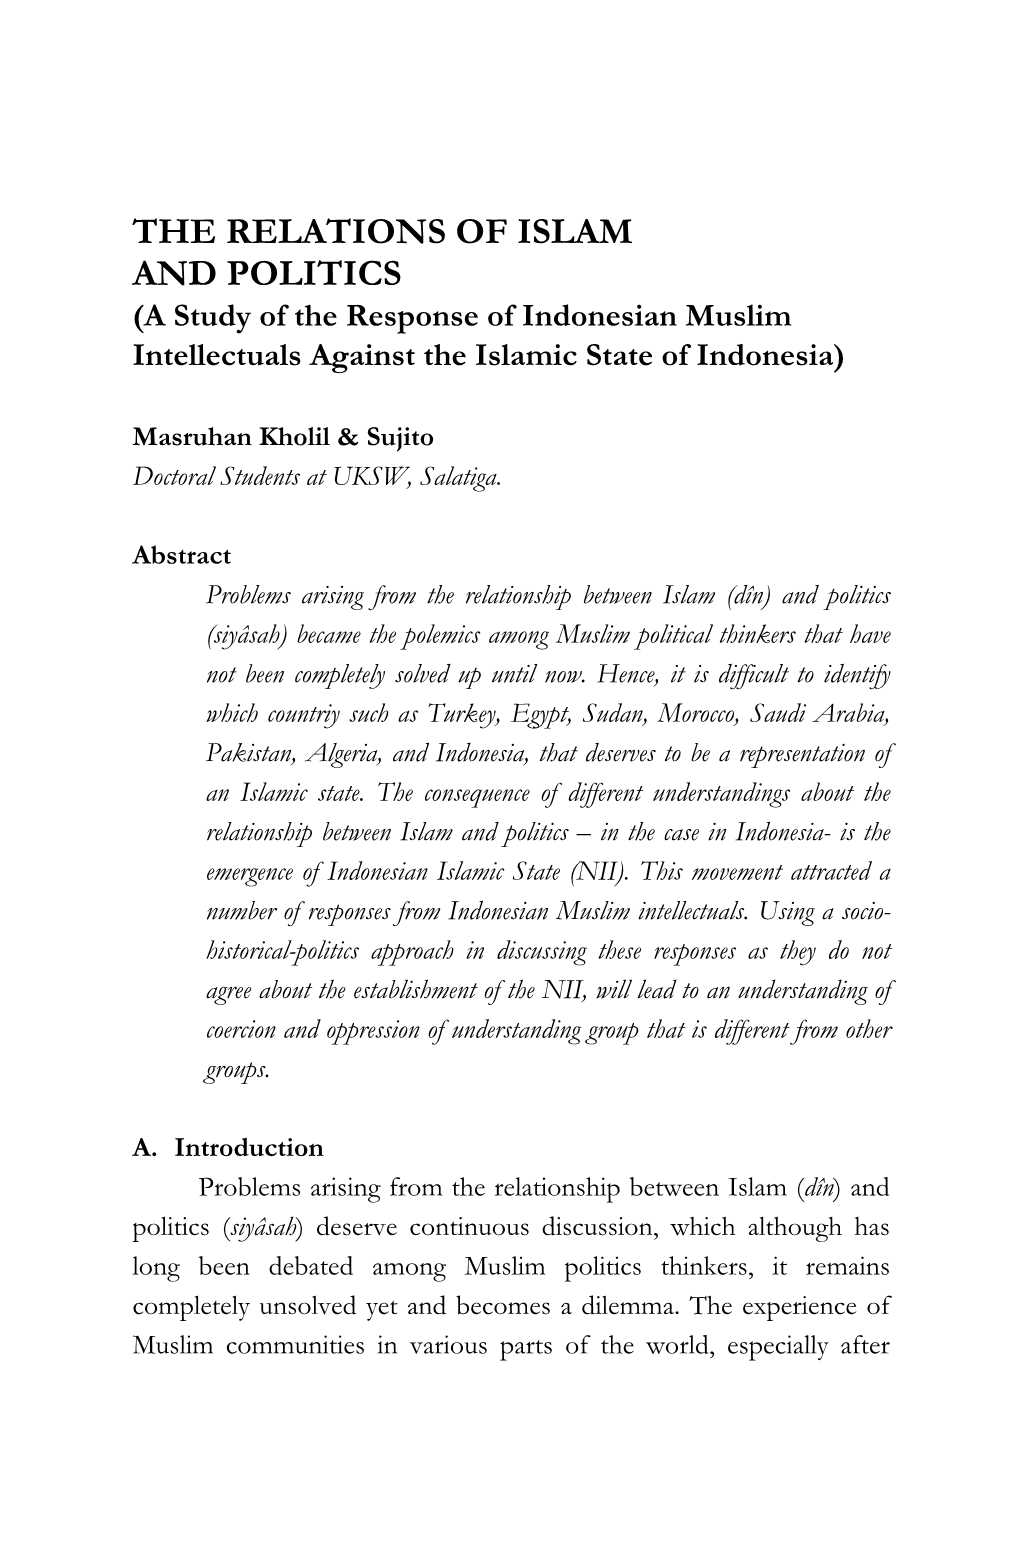 THE RELATIONS of ISLAM and POLITICS (A Study of the Response of Indonesian Muslim Intellectuals Against the Islamic State of Indonesia)